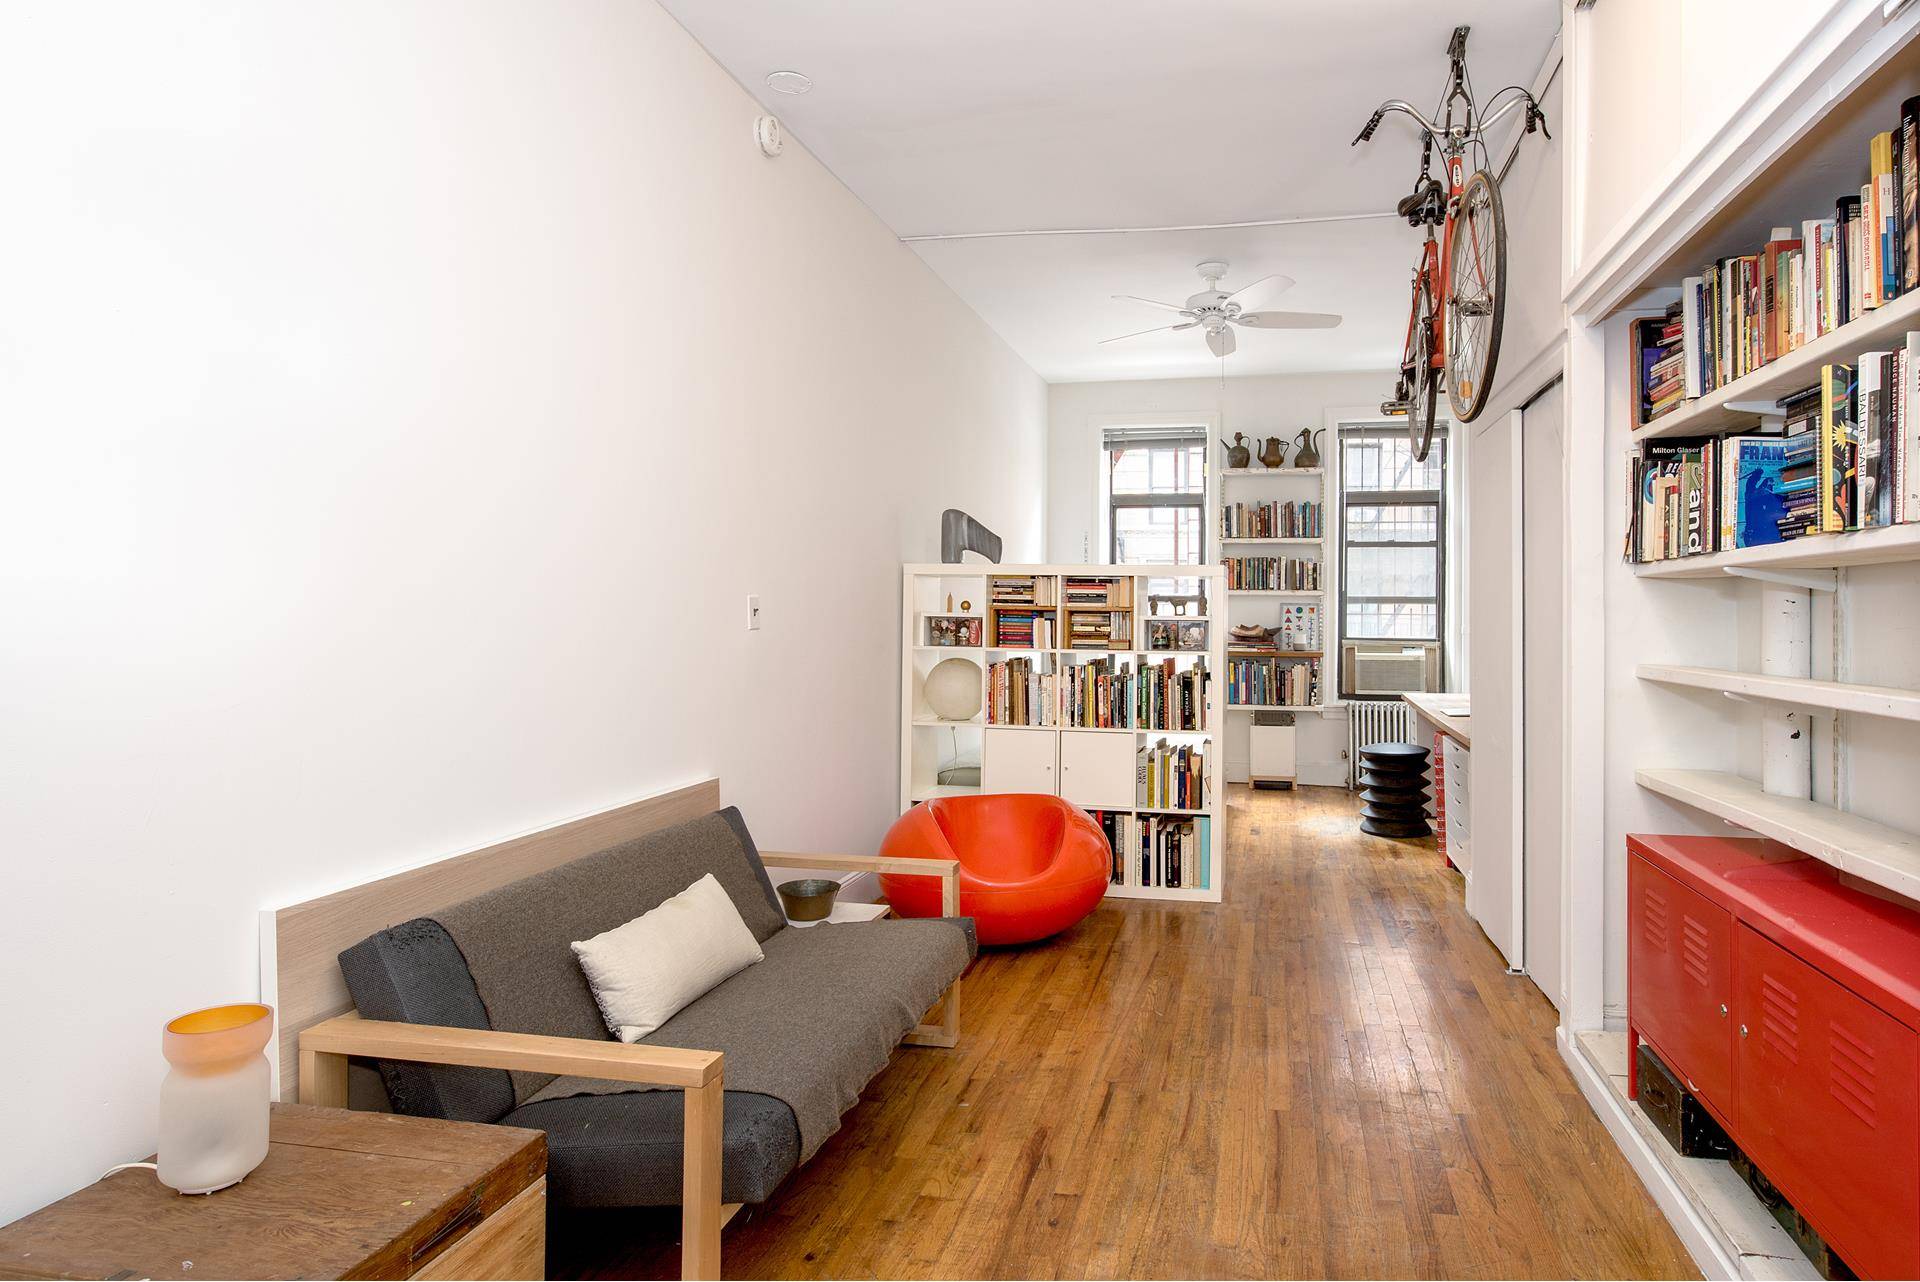 New Listing ! Walk up to the second floor and step right into this spacious, sunny and charming pre war, loft like East Village home !